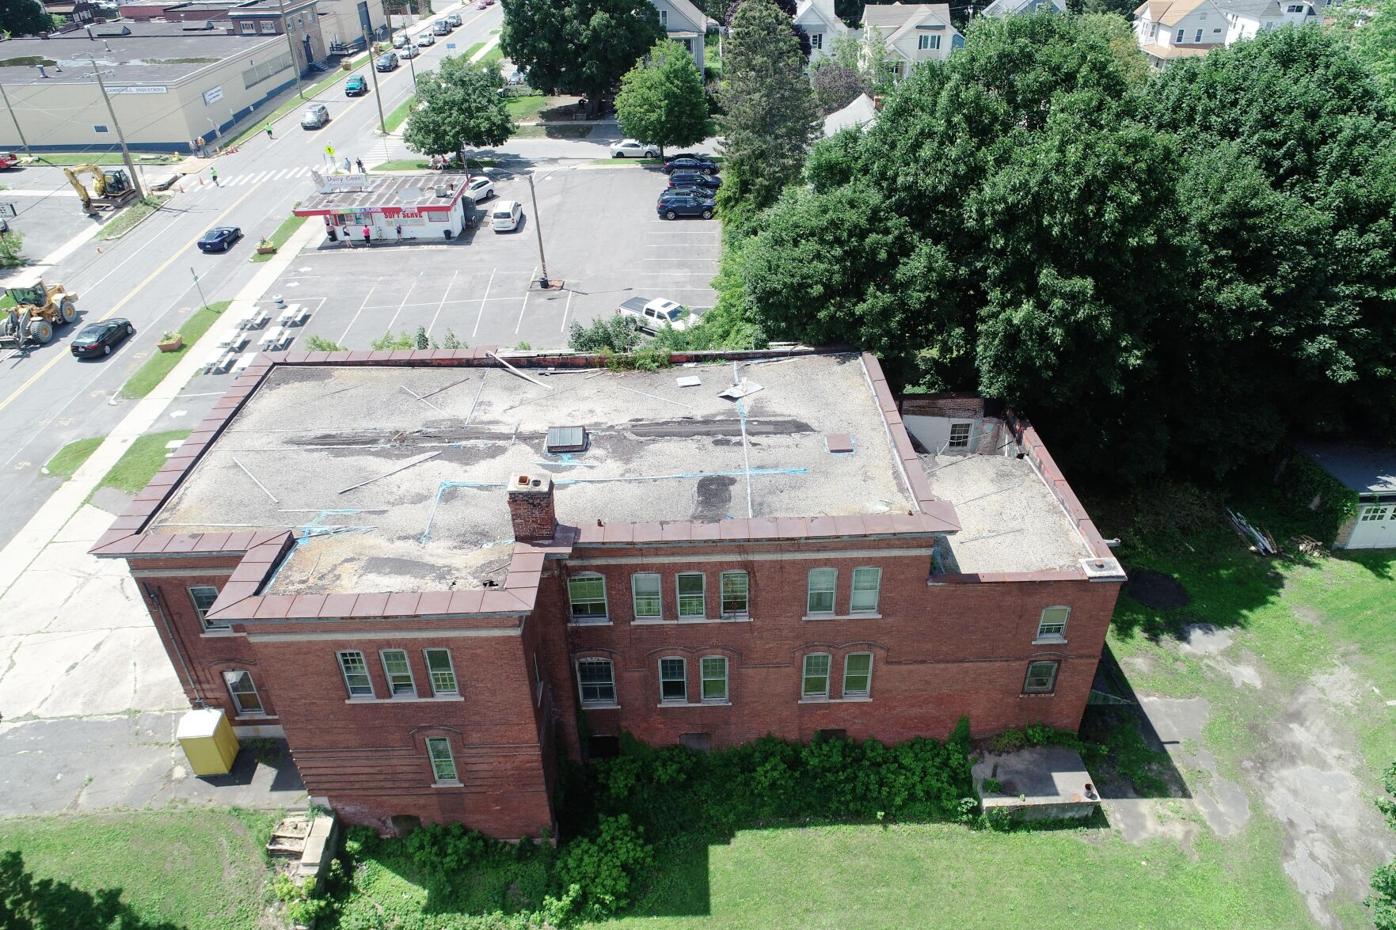 Aerial view of the Morningside Fire Station